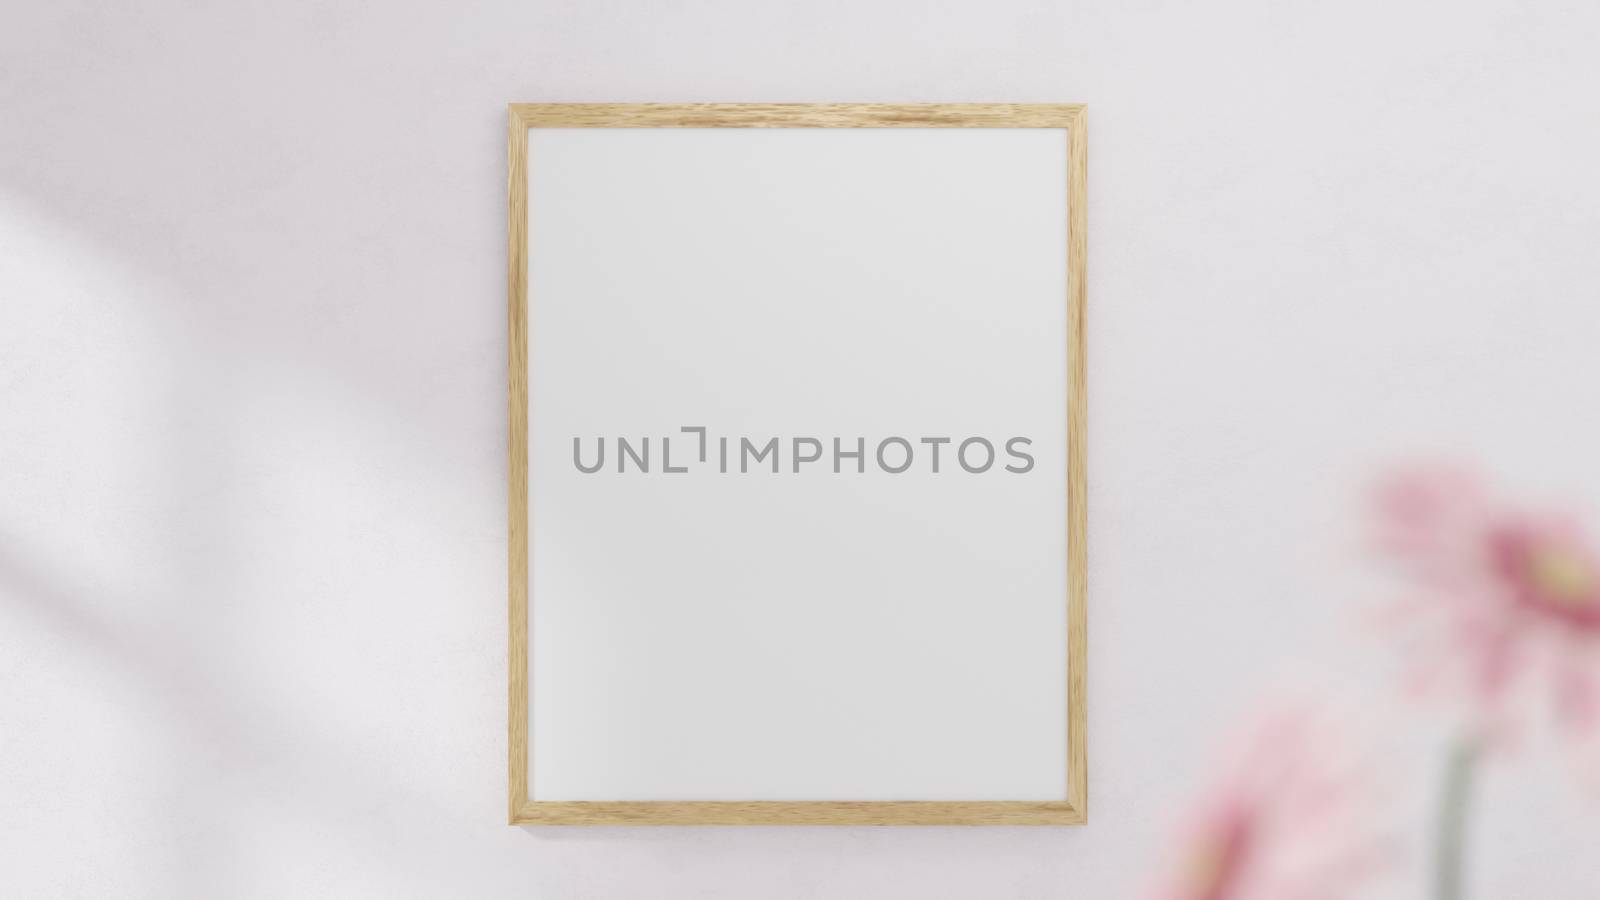 A blank picture and poster frame set on a shelf on the wall. by ijeab